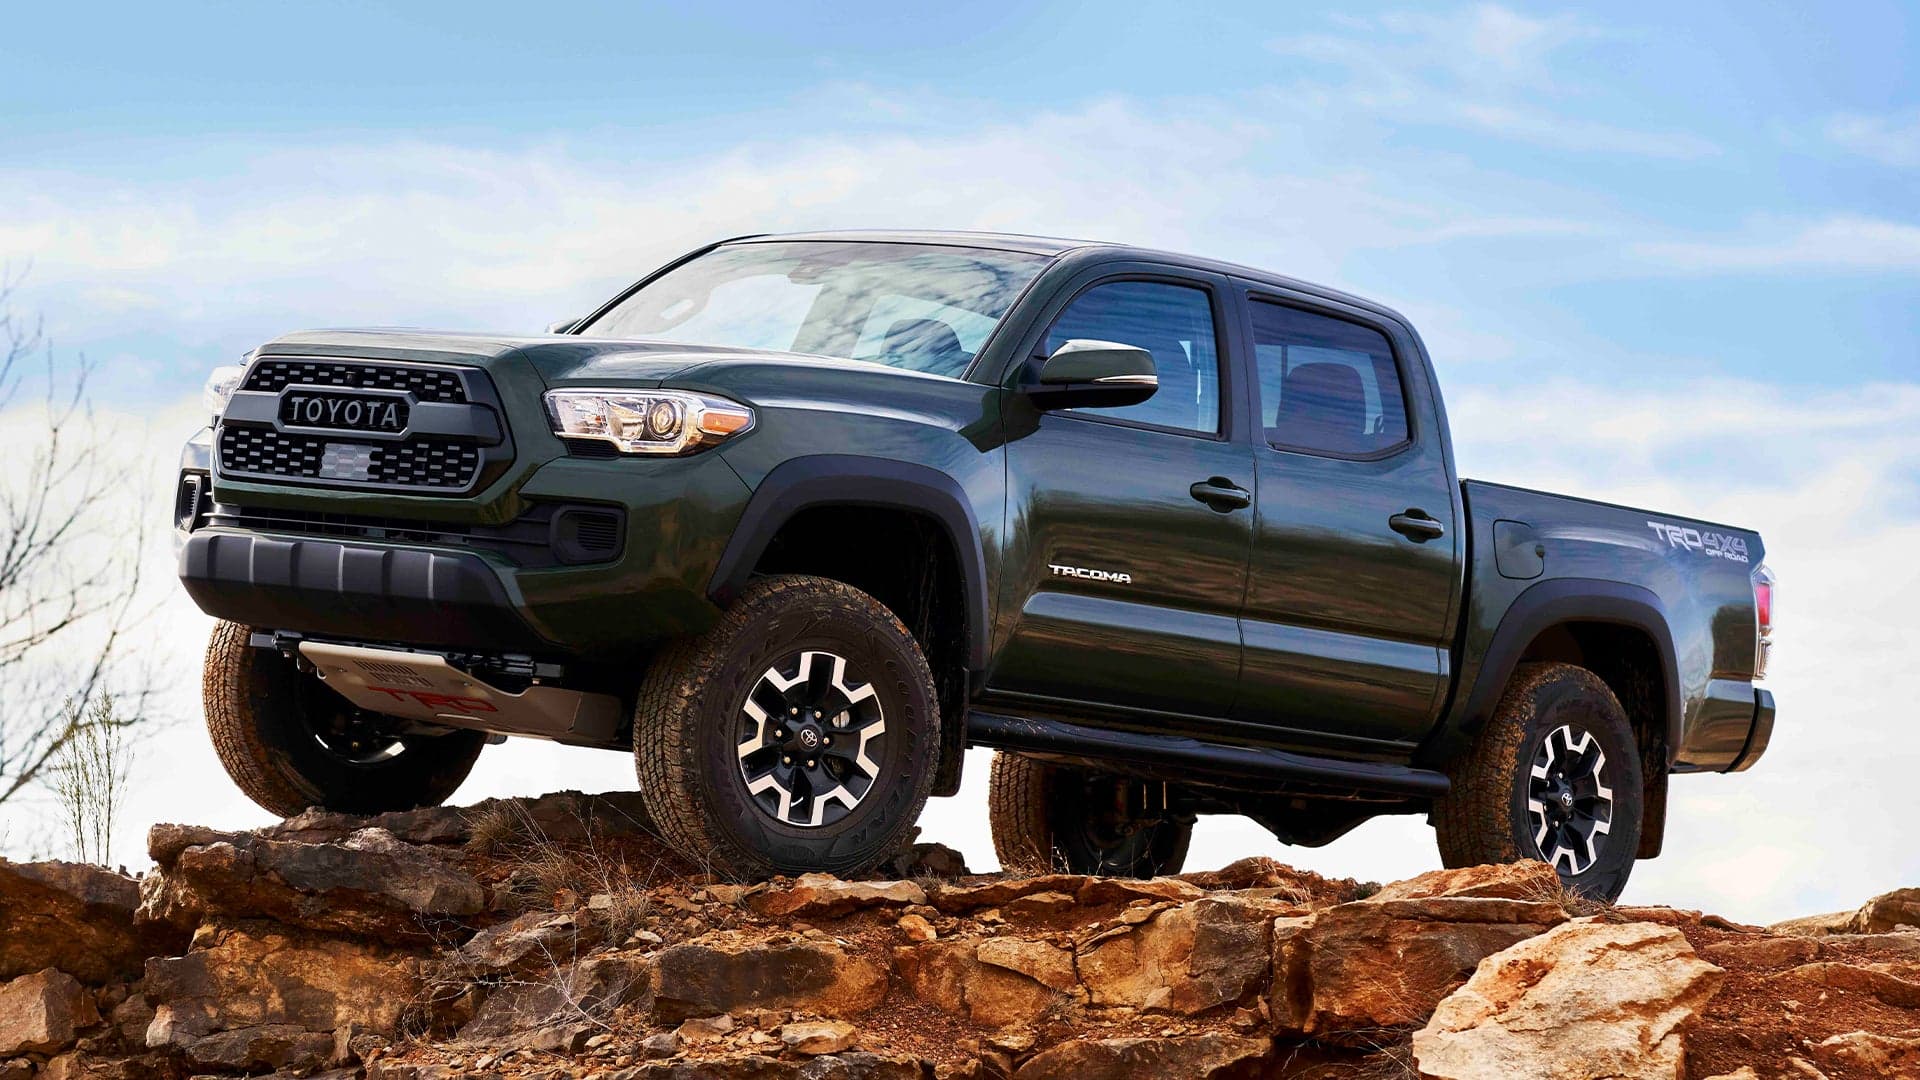 Electrified Toyota Pickup Trucks Are Coming by 2025